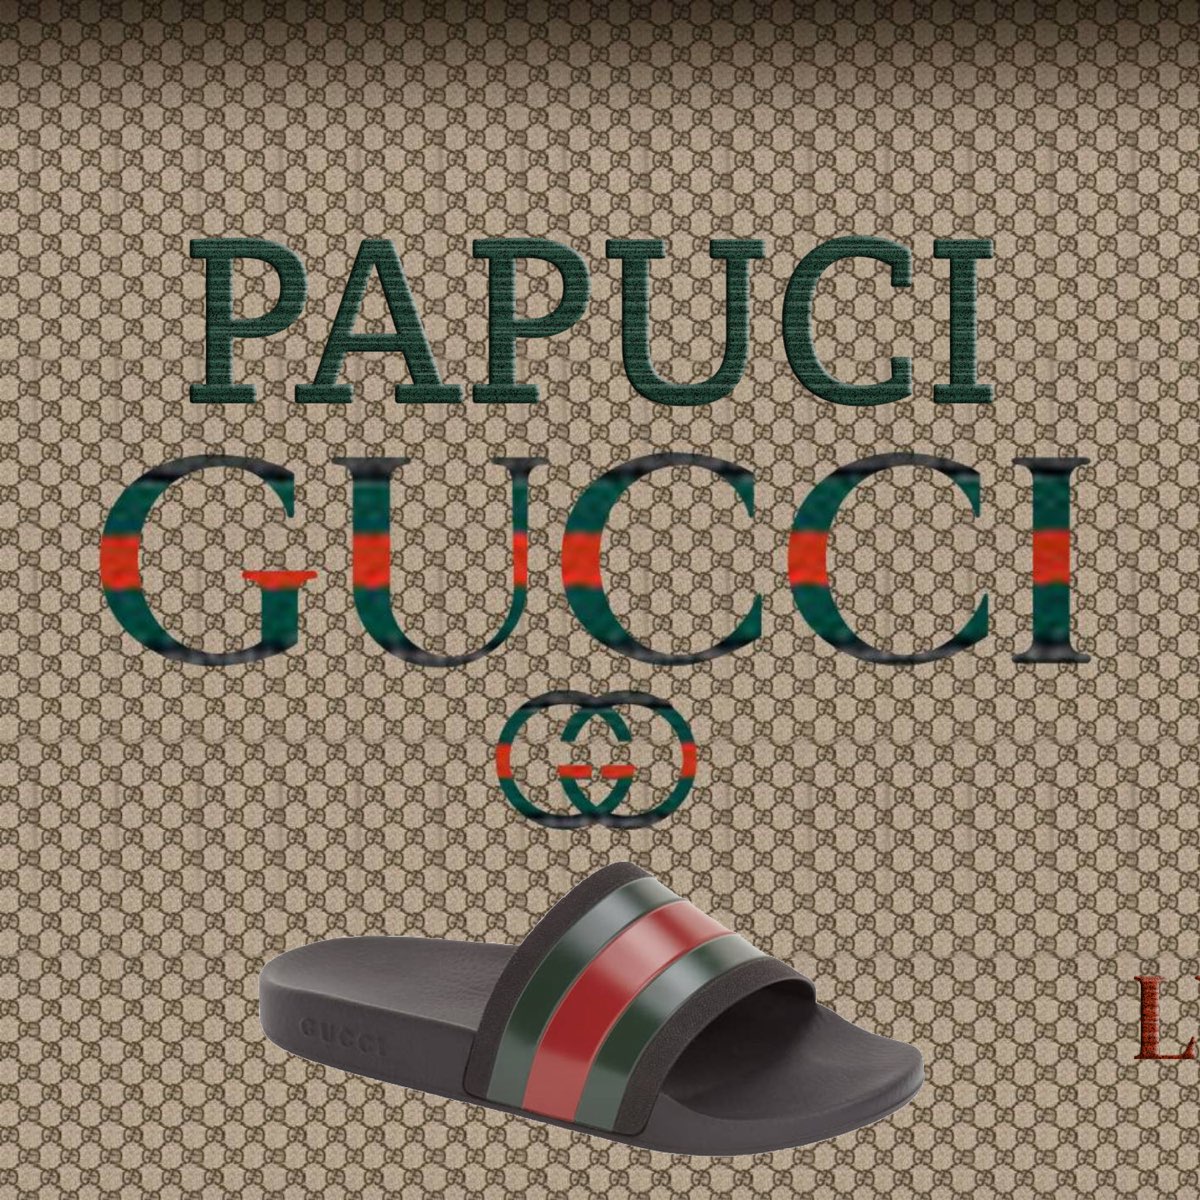 Papuci Gucci - Single by LUCCI on Apple Music